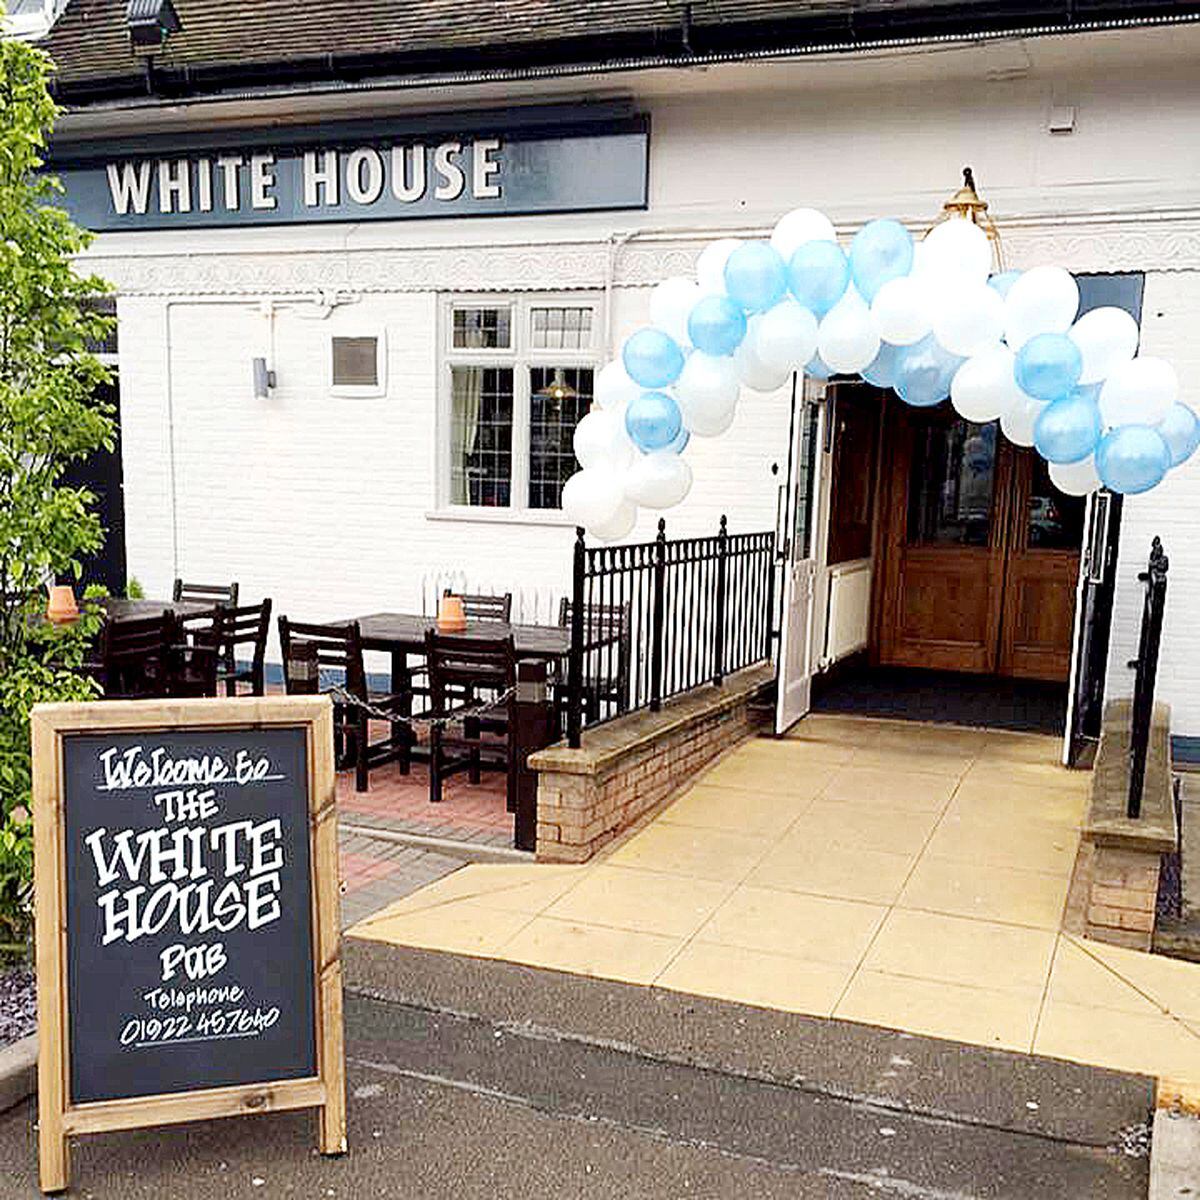 The White House in Walsall